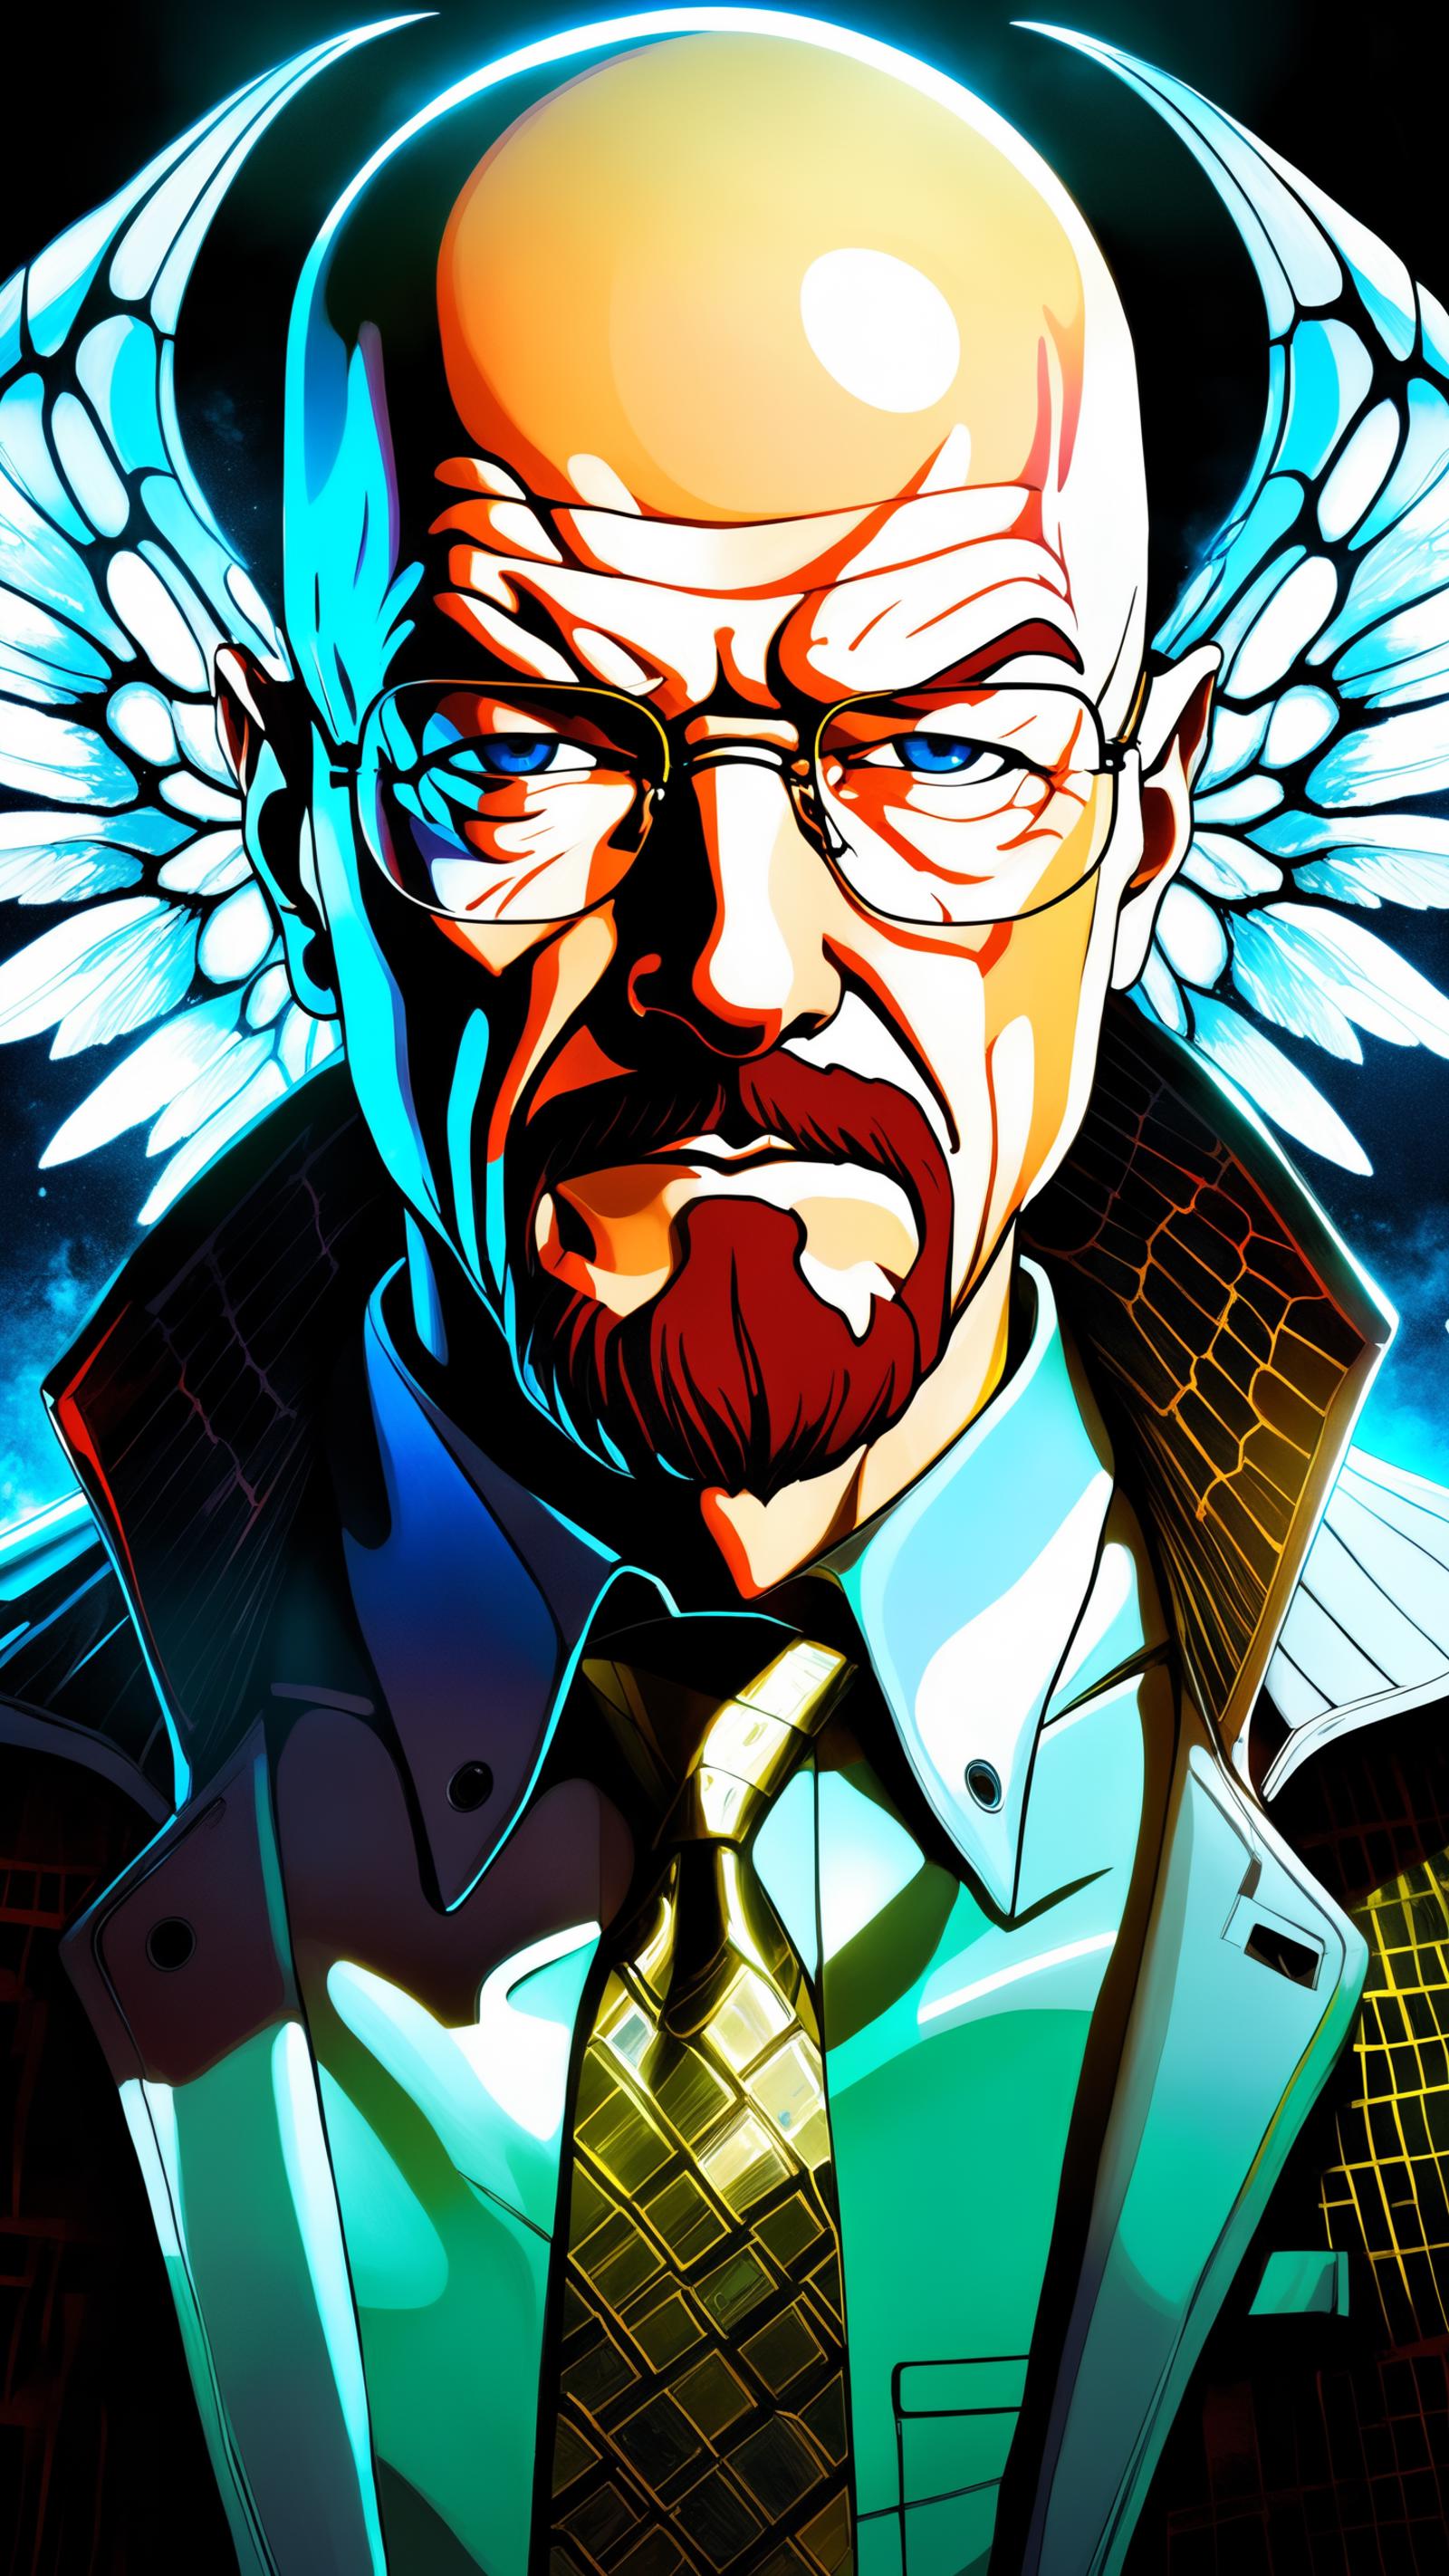 A digital painting of a man with a red beard and a red mustache, wearing a suit and tie, with a winged design in the background.